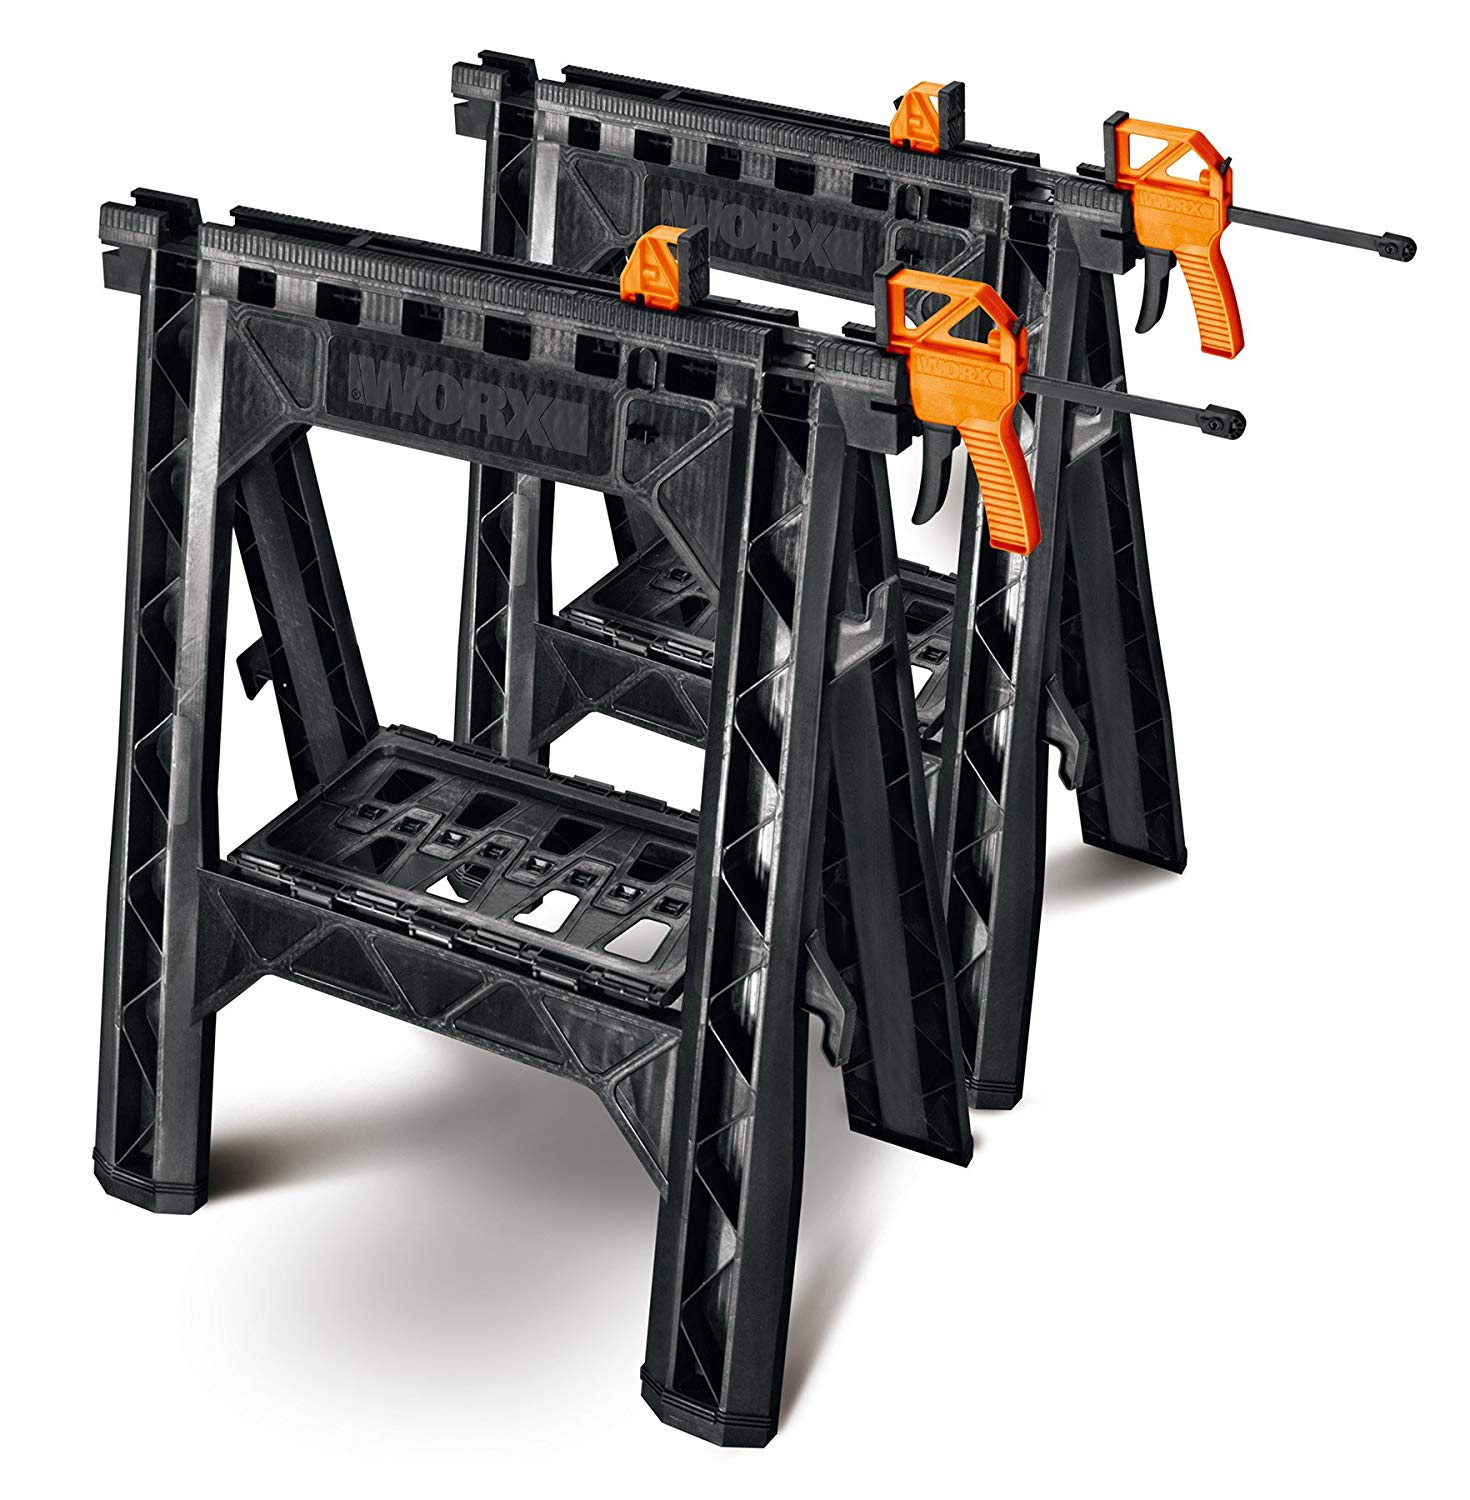 WORX Clamping Sawhorse Pair with Bar Clamps, Built-in Shelf and Cord Hooks 2